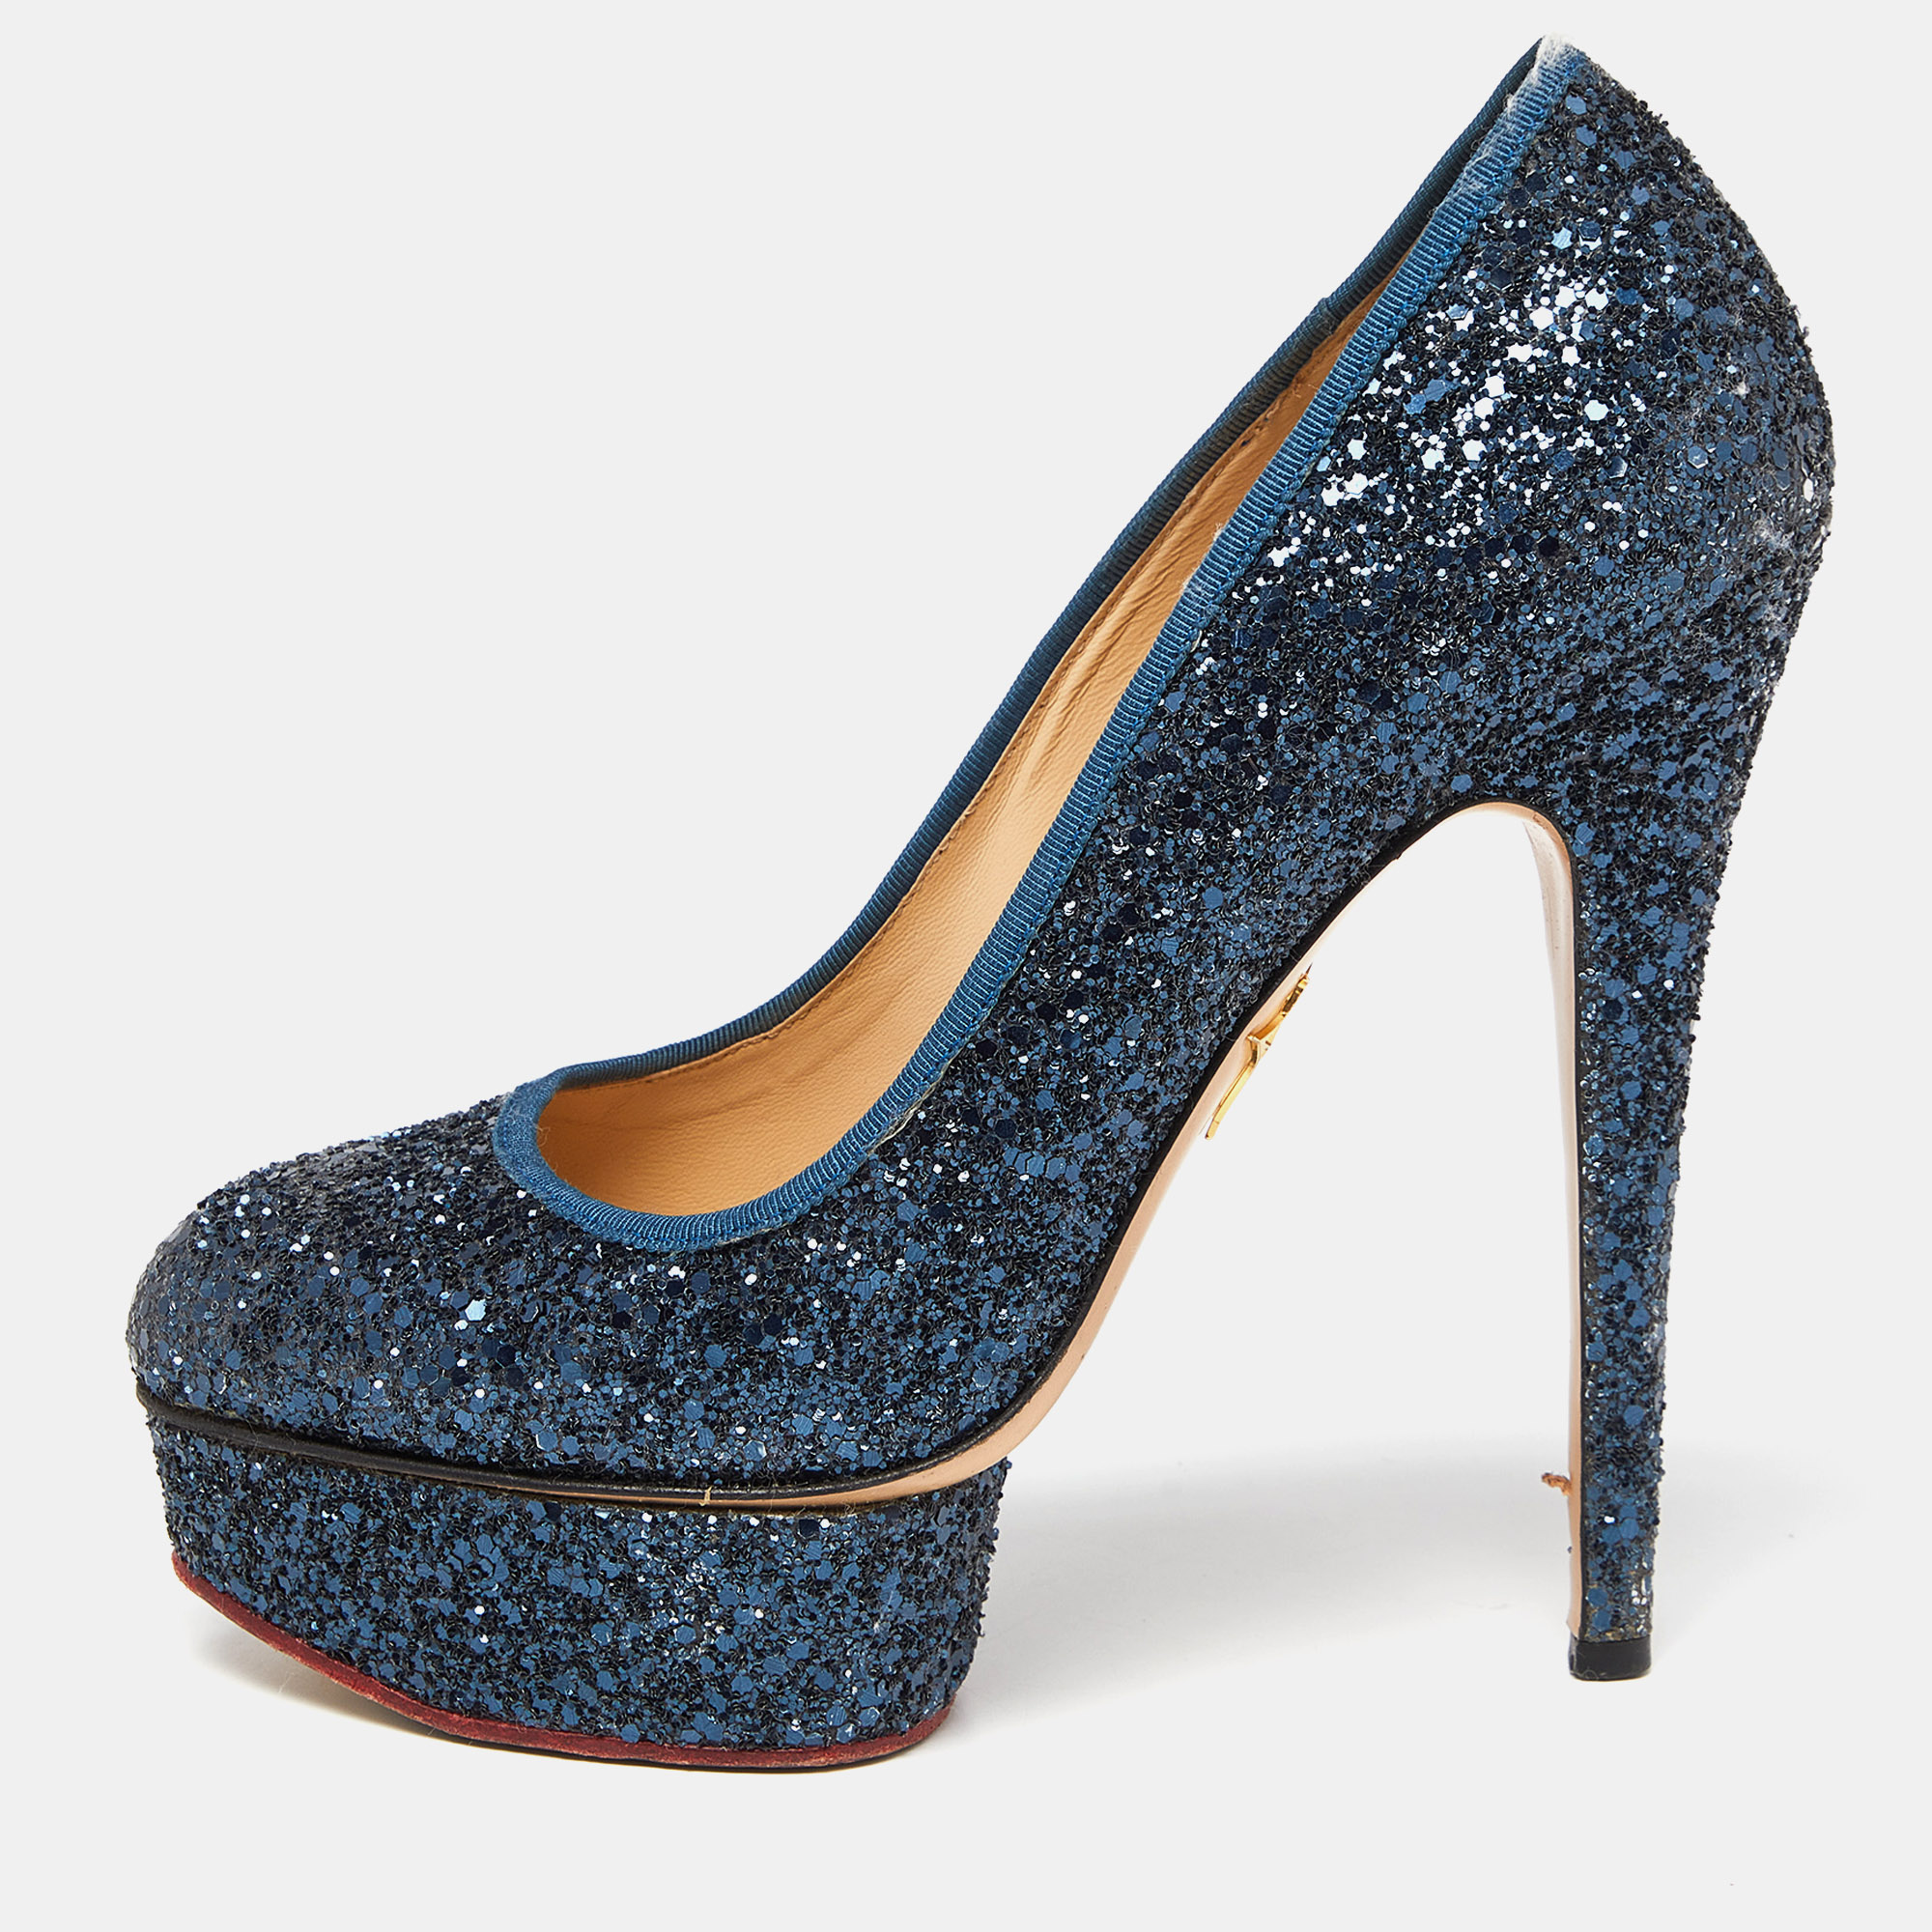 Pre-owned Charlotte Olympia Blue Glitter And Fabric Priscilla Platform Pumps Size 38